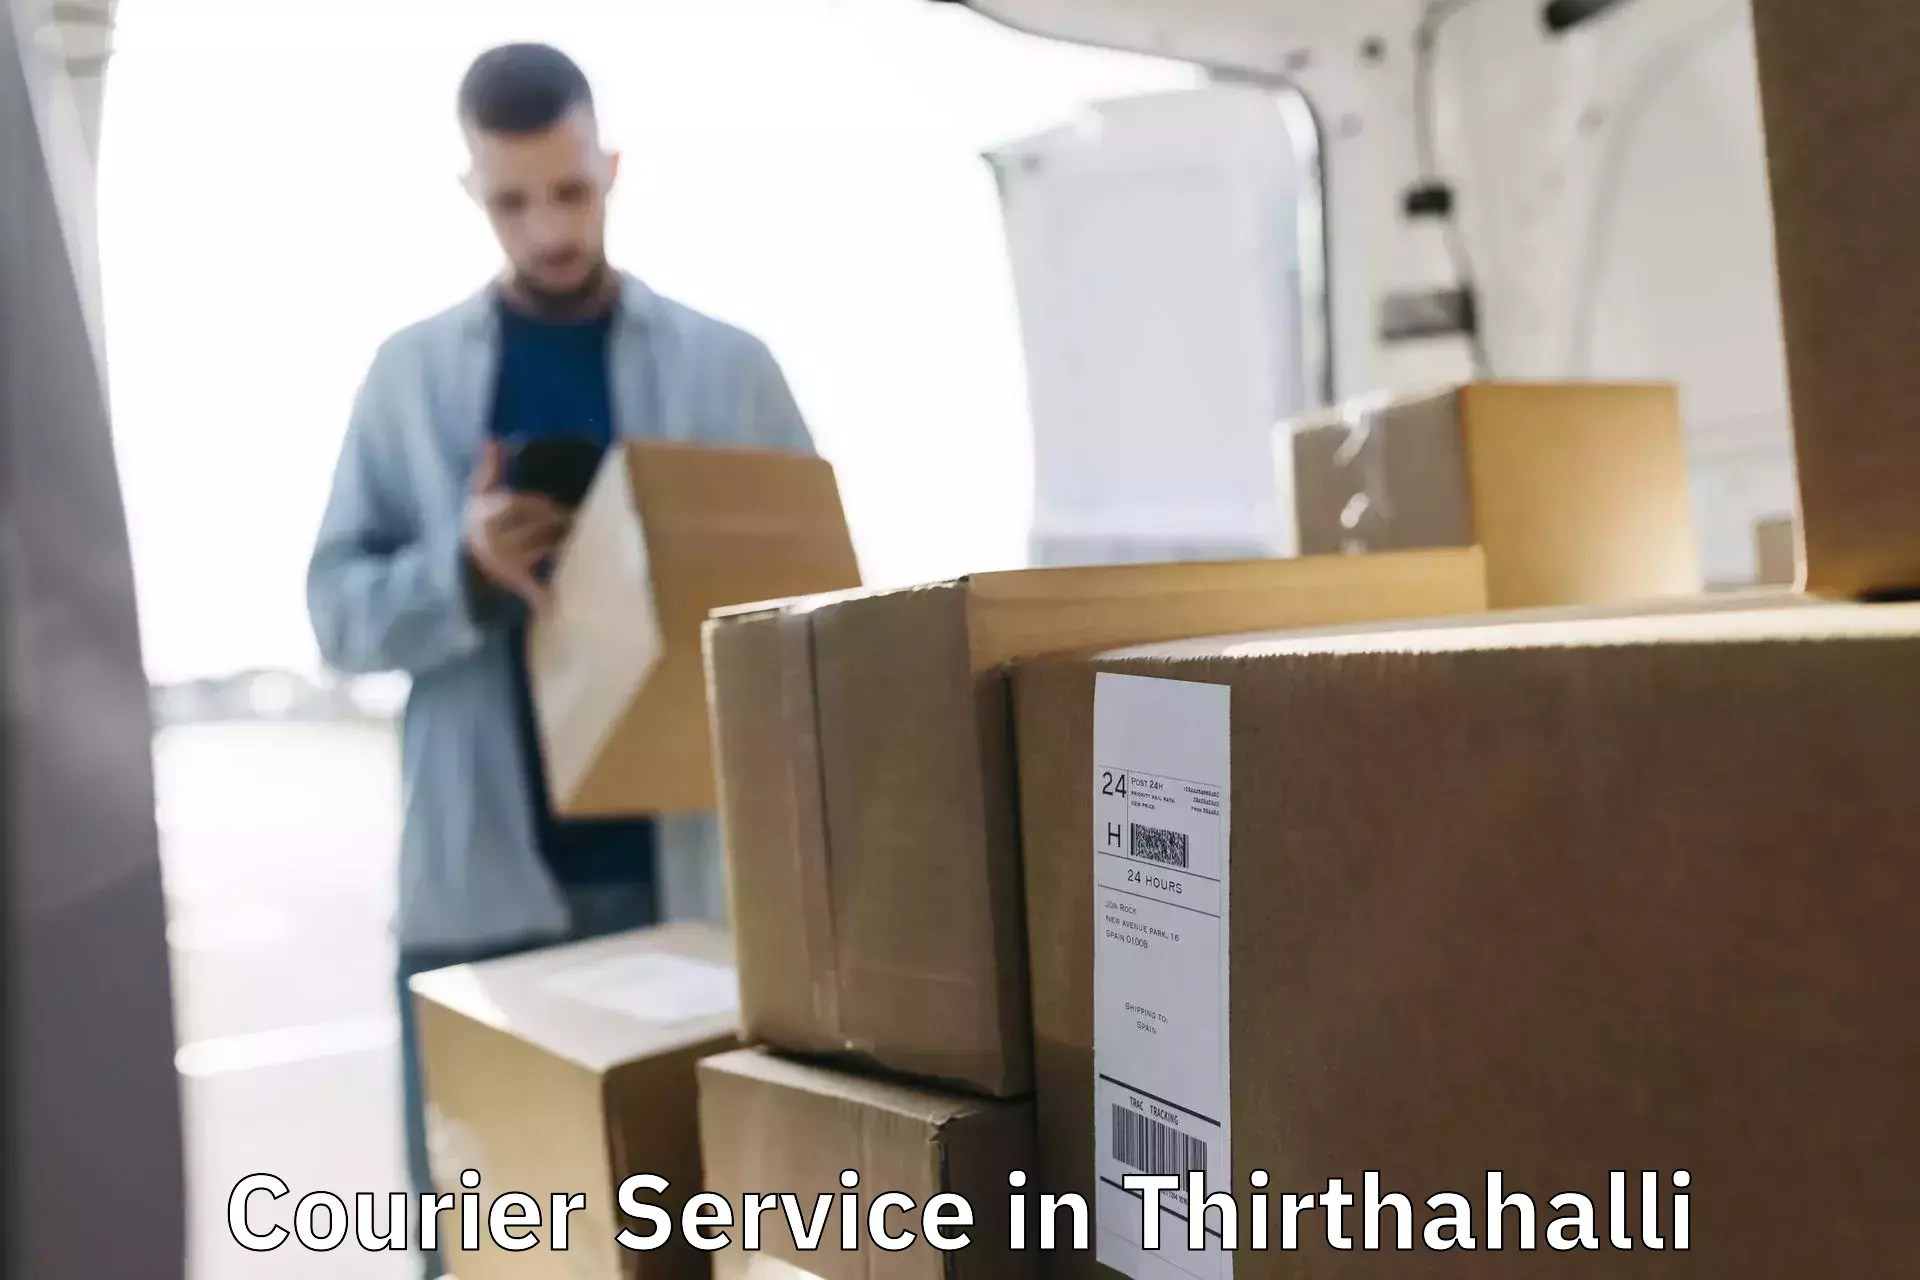 Expedited shipping solutions in Thirthahalli